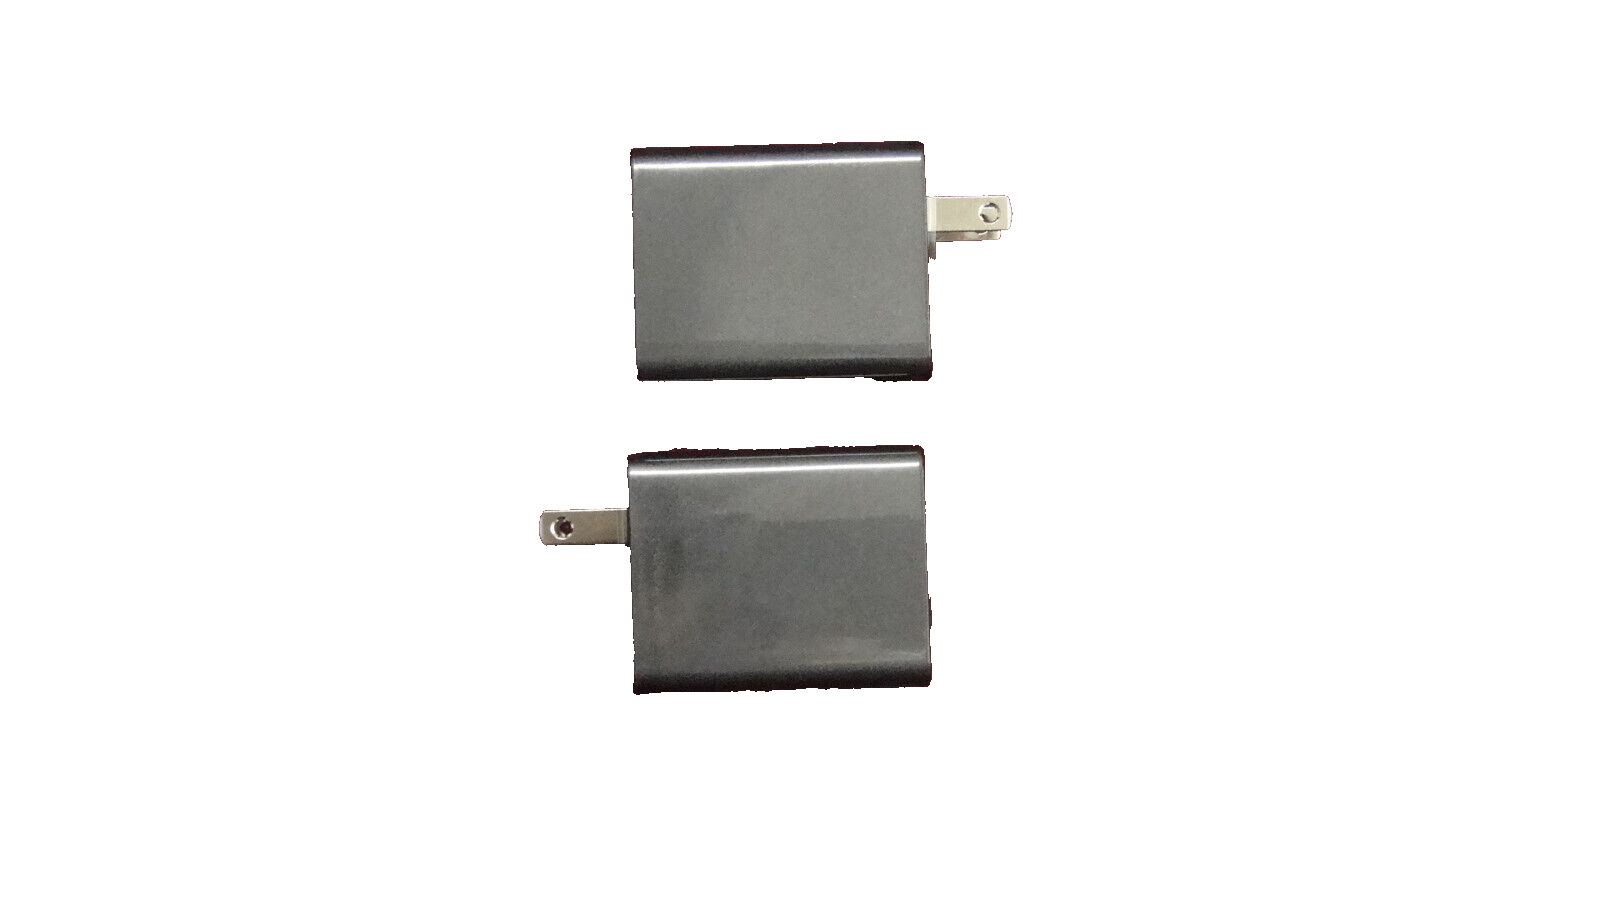 2 x Genuine ASUS AD2022320 Power Adapter Wall Charger 10w OR 18w NO USB CABLE